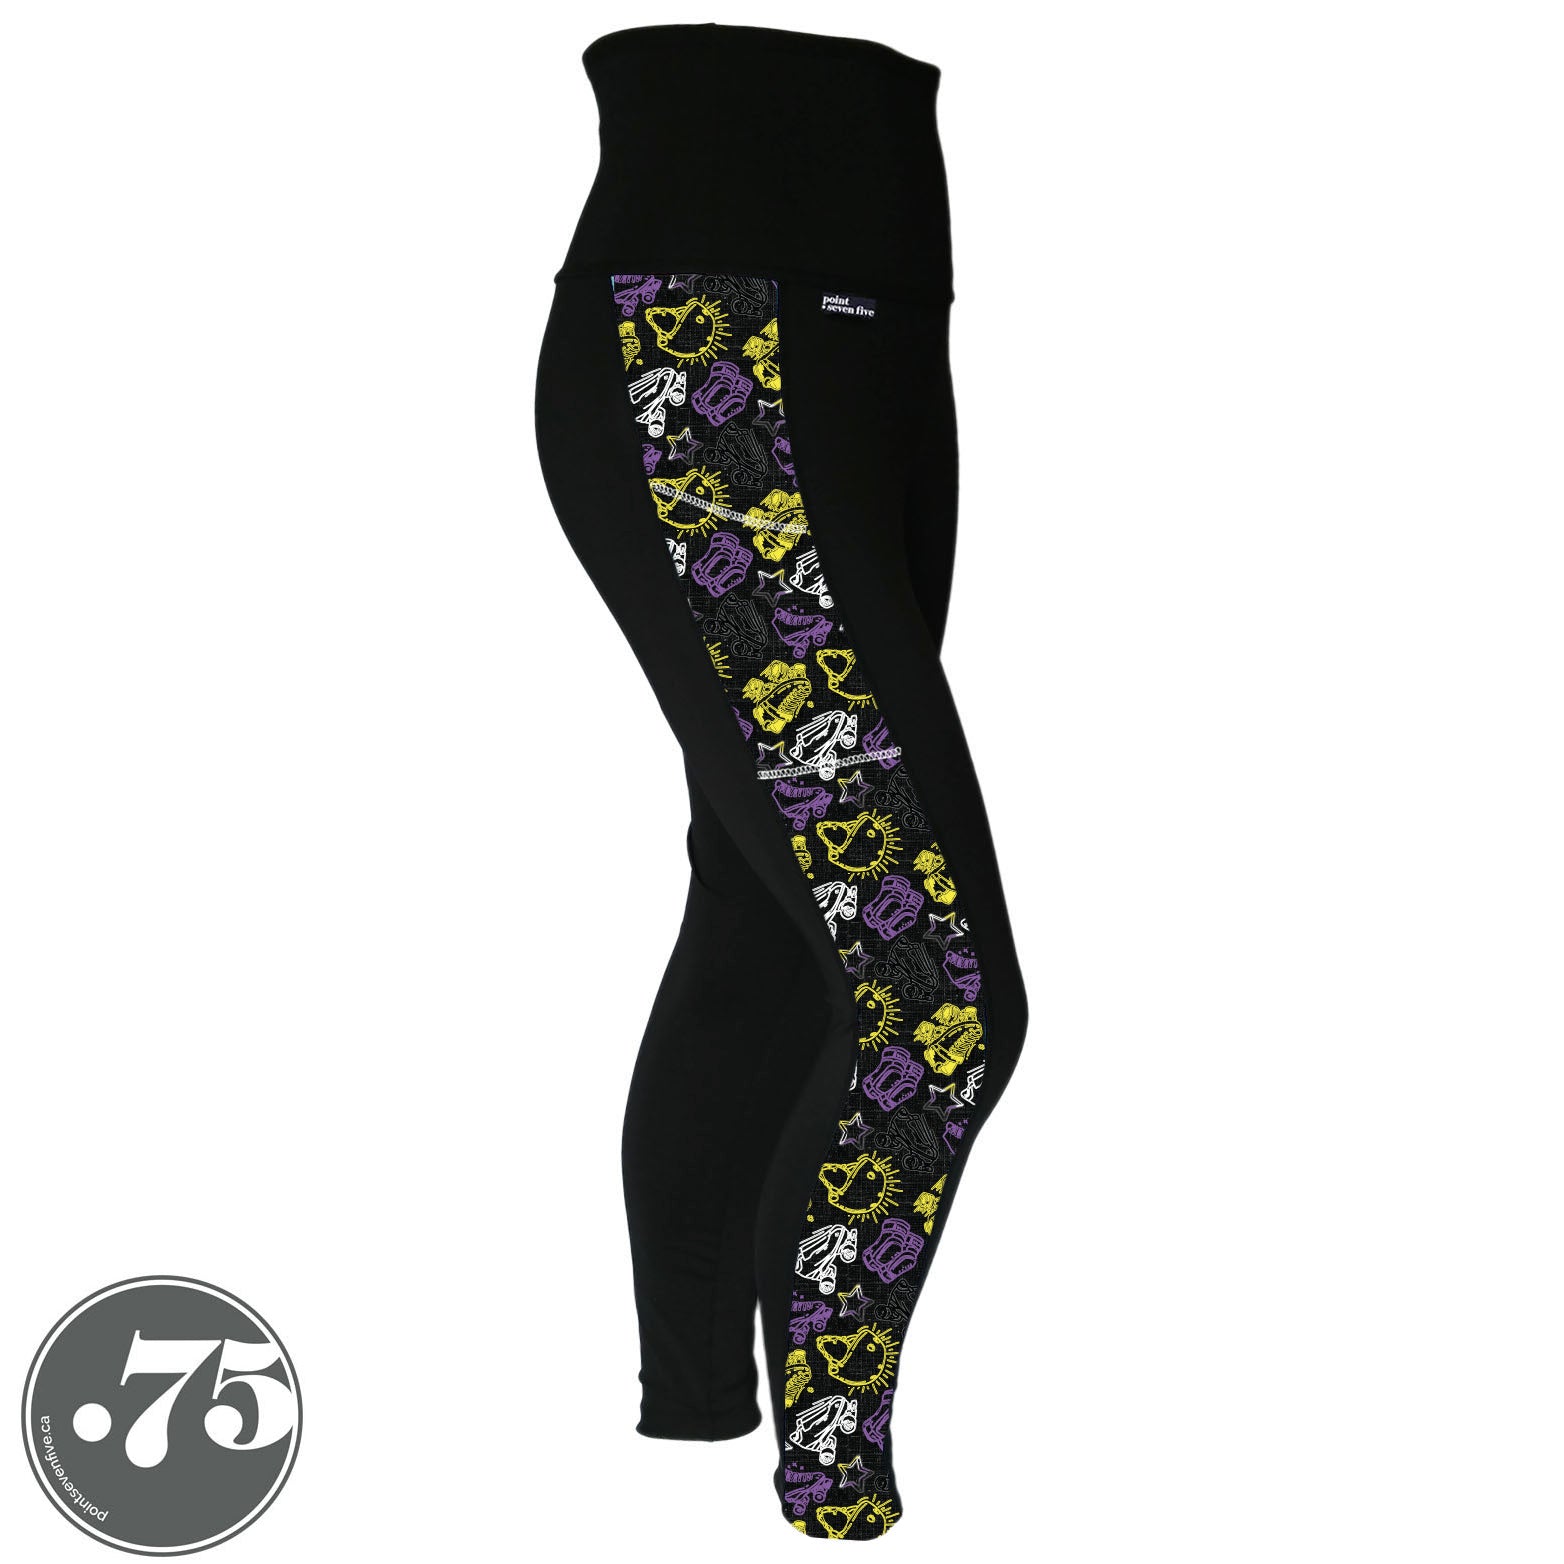 A pair of black spandex leggings on a mannequin, the leggings have a 3.5” wide stripe down the side that has a printed fabric with rollerskates, helmets, stars & knee pads. The graphics are in the colours of the Non-Binary Pride Flag, white, black, purple and yellow. 